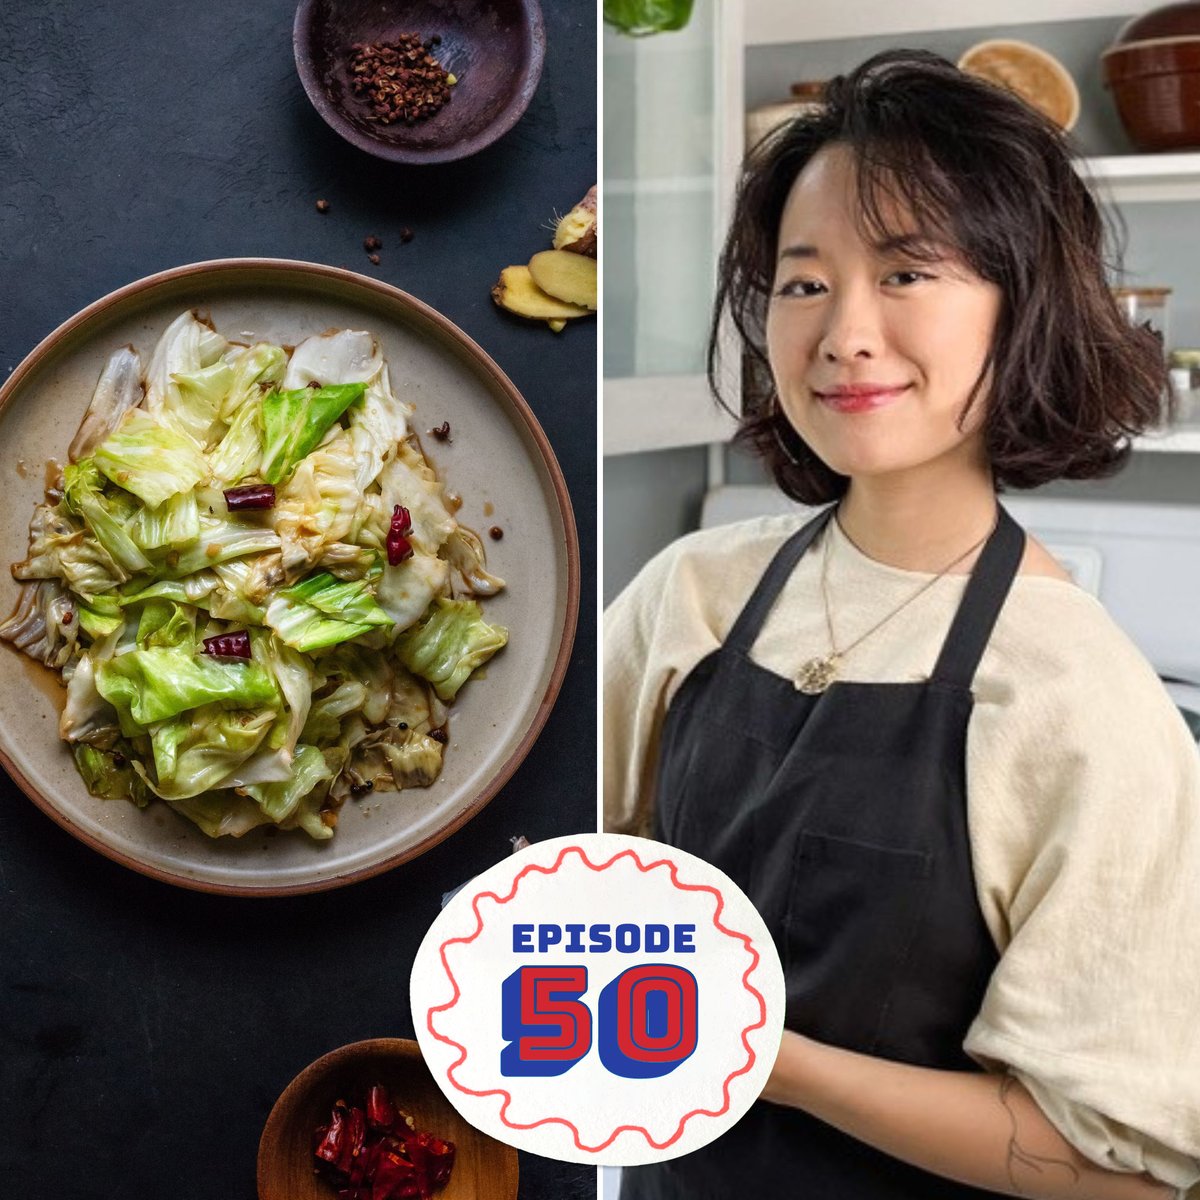 The One Recipe is back for Season 3 (our 50th episode!) with award-winning cookbook author & chef @hannahbche. Hannah talks with @JesseASparks about the history of plant-based eating in China and her One Recipe for Hand Torn Cabbage. Listen: splendidtable.org/episode/2023/0…